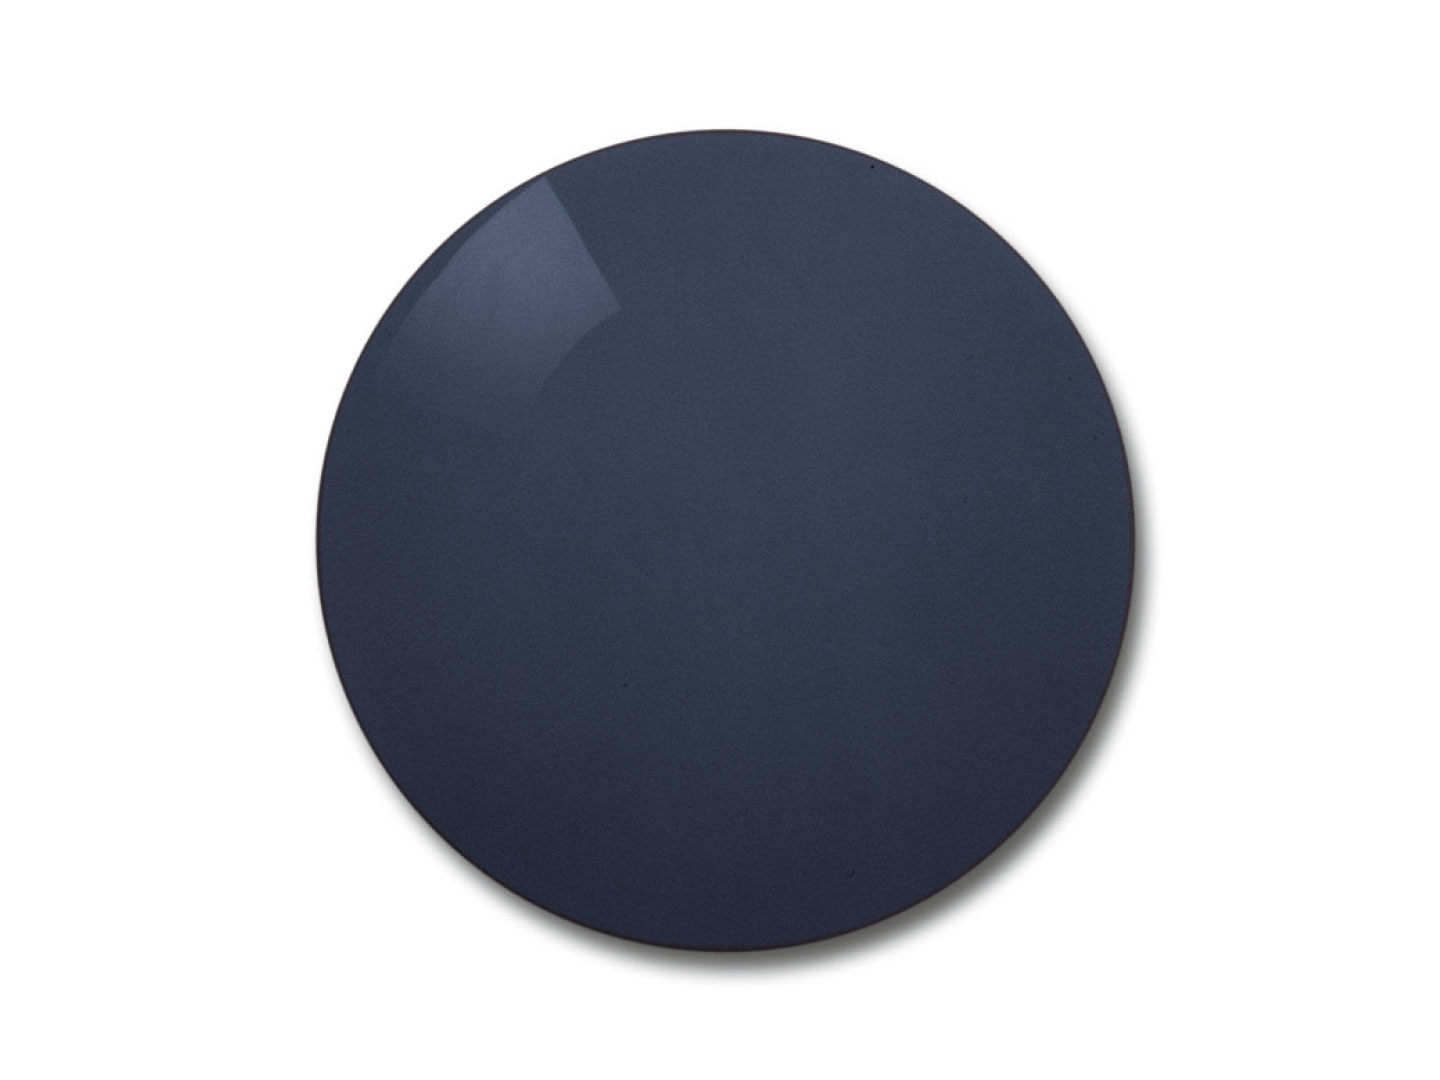 Illustration of ZEISS Polarized Lens in the color option grey 